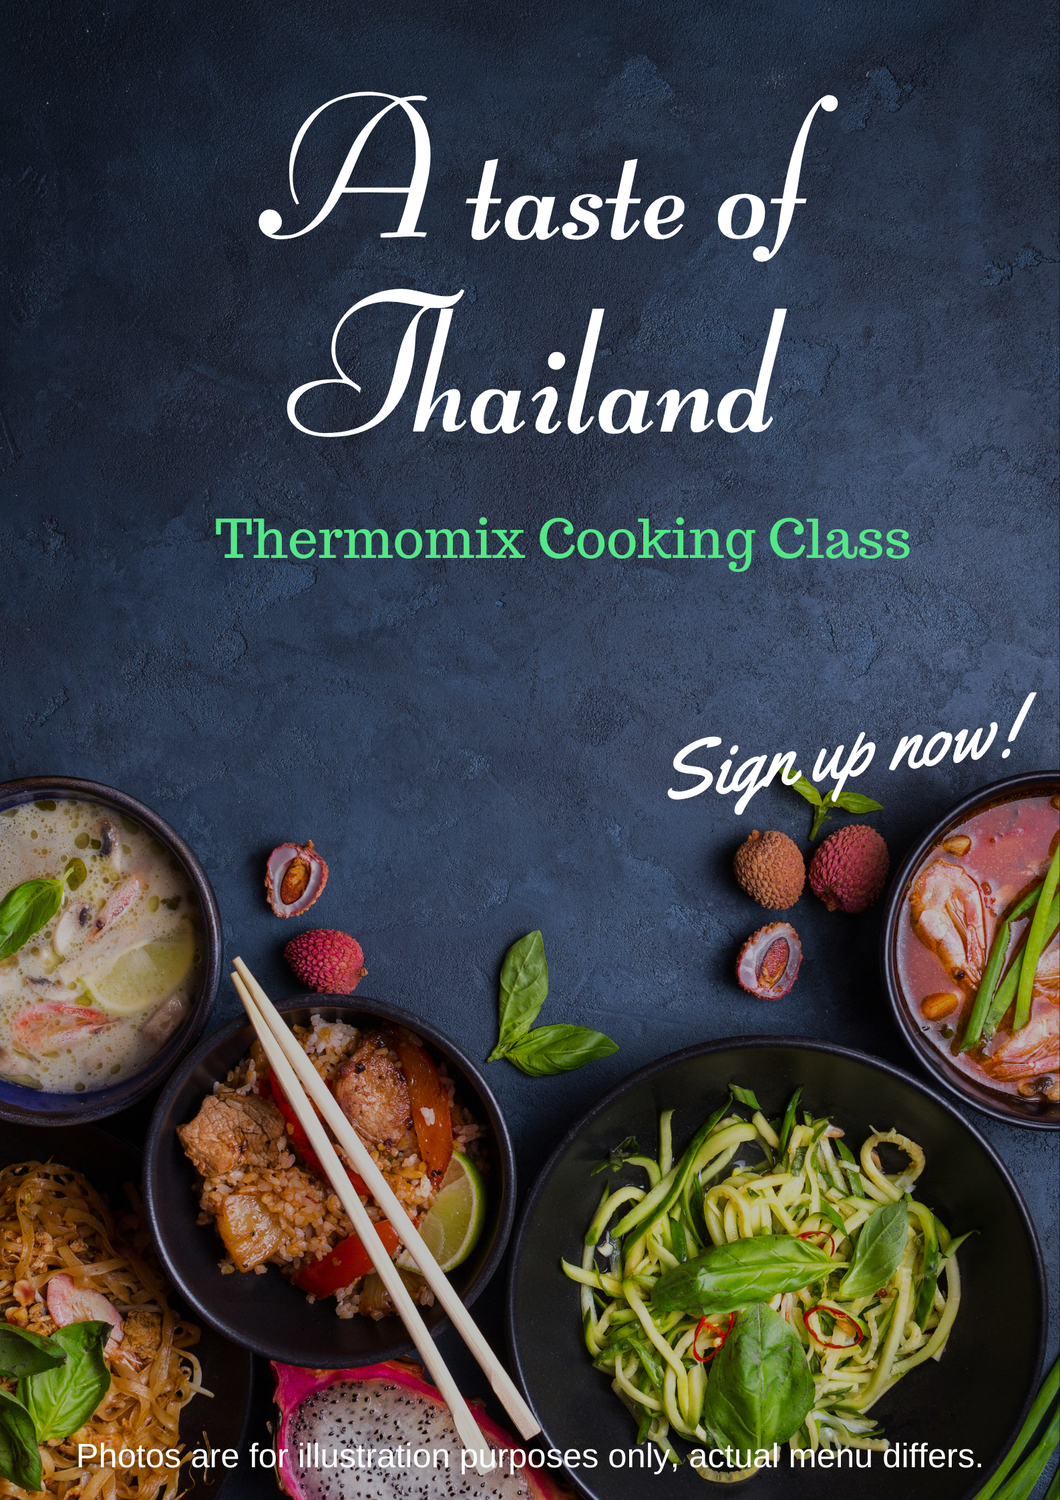 THERMOMIX® COOKING CLASSES -  A taste of Thailand